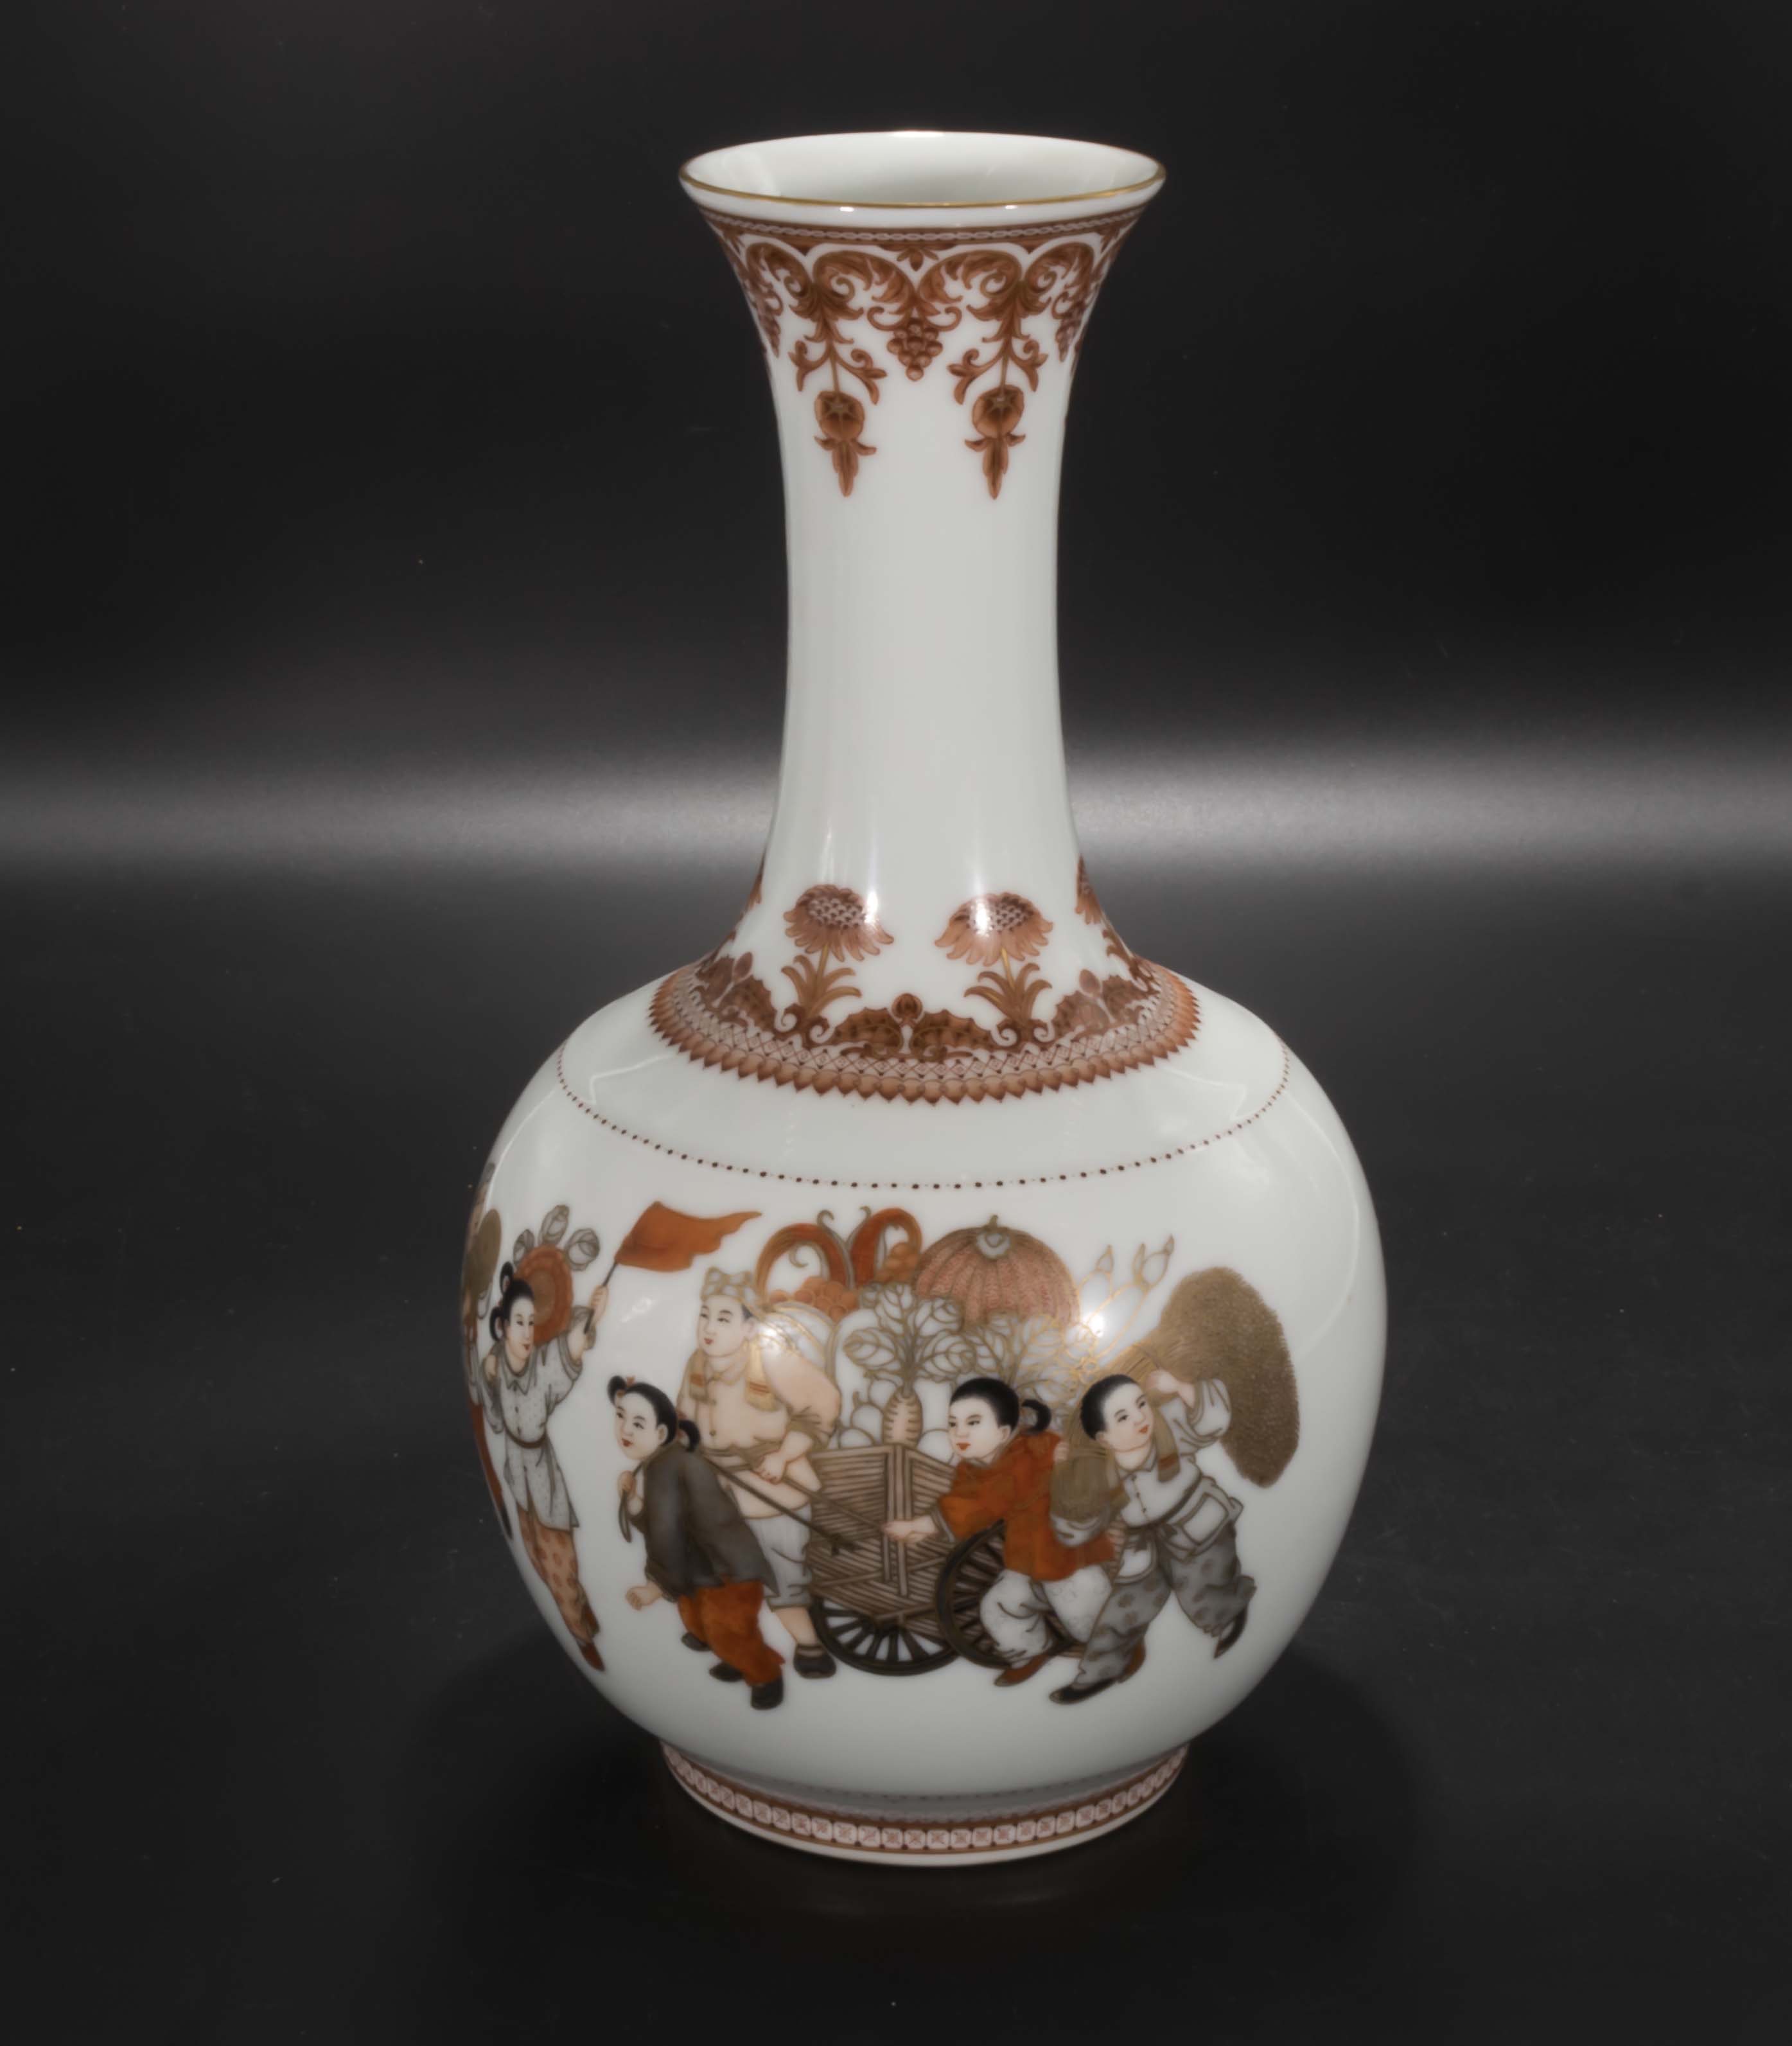 A Chinese Republic period bottle necked vase, decorated with children dancing waving a red flag, 12"